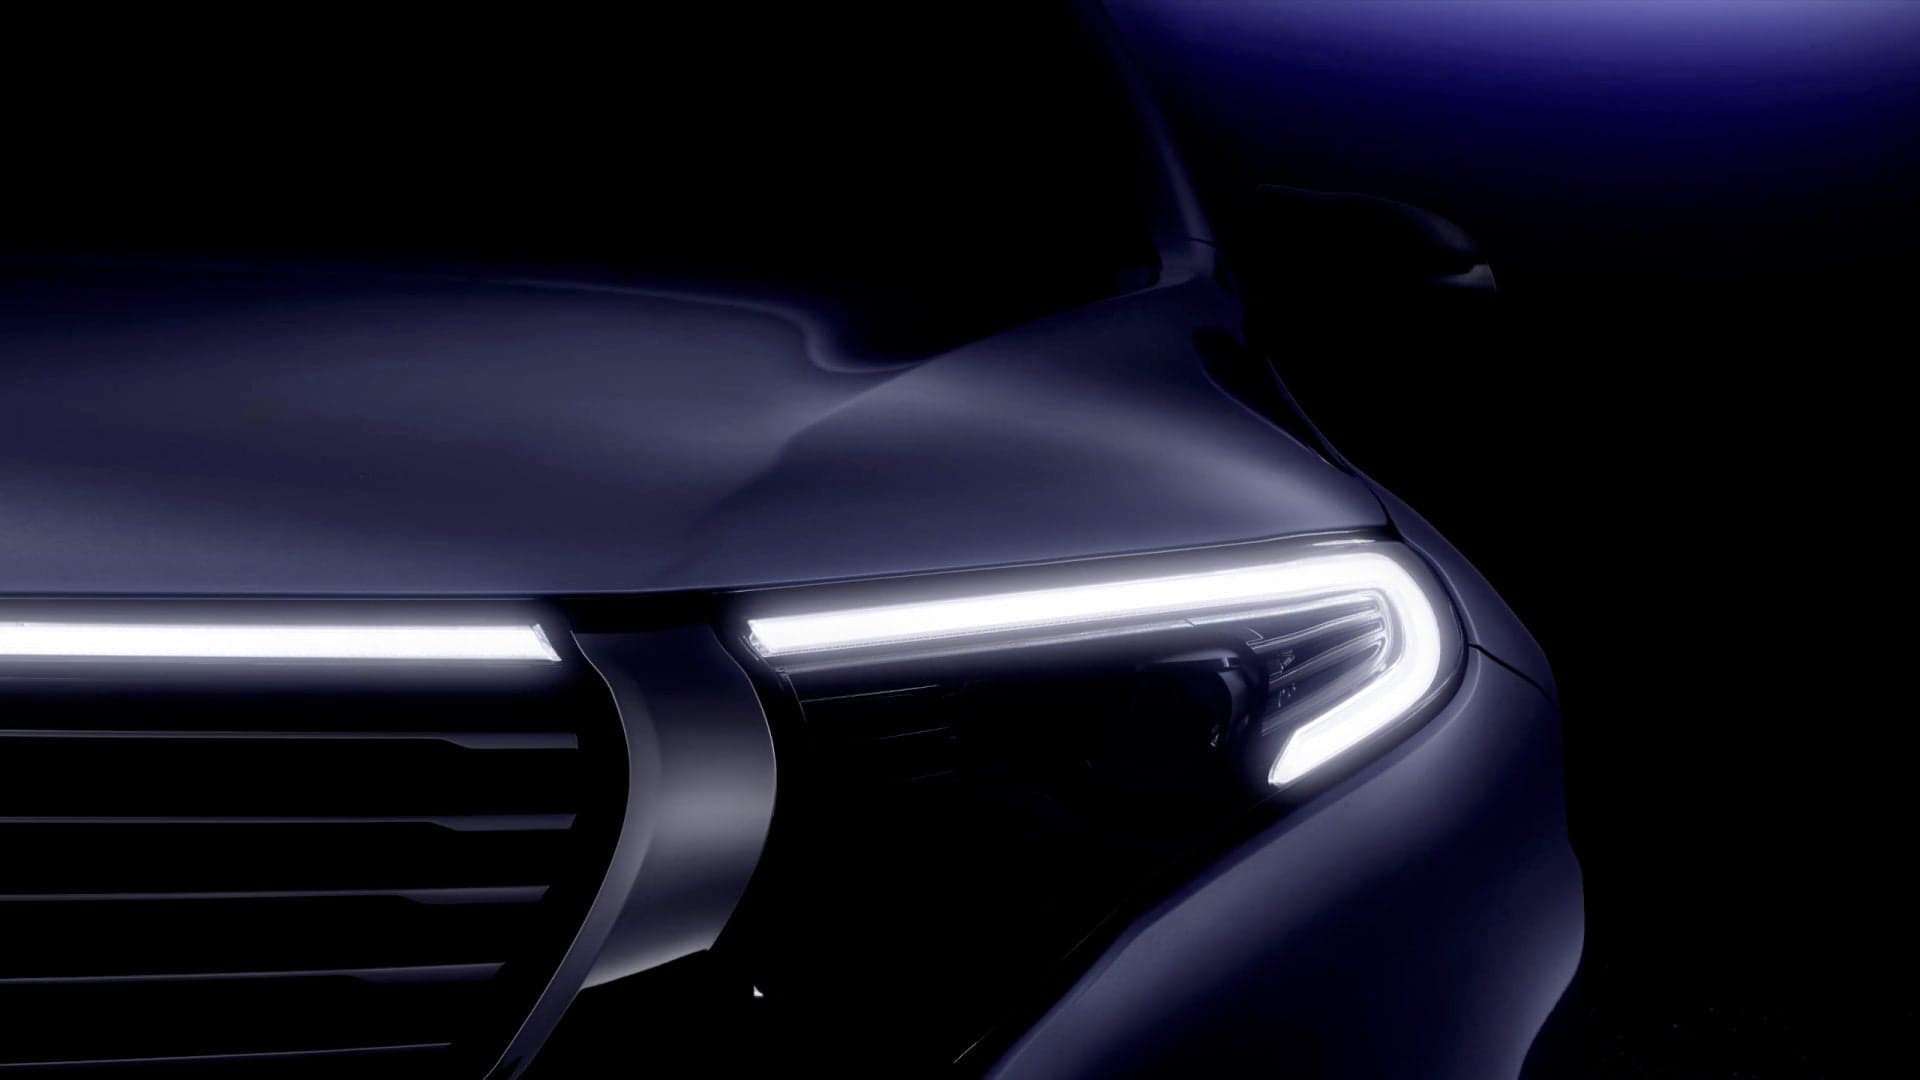 Mercedes-Benz Teases What May Be Its EQC Electric Crossover